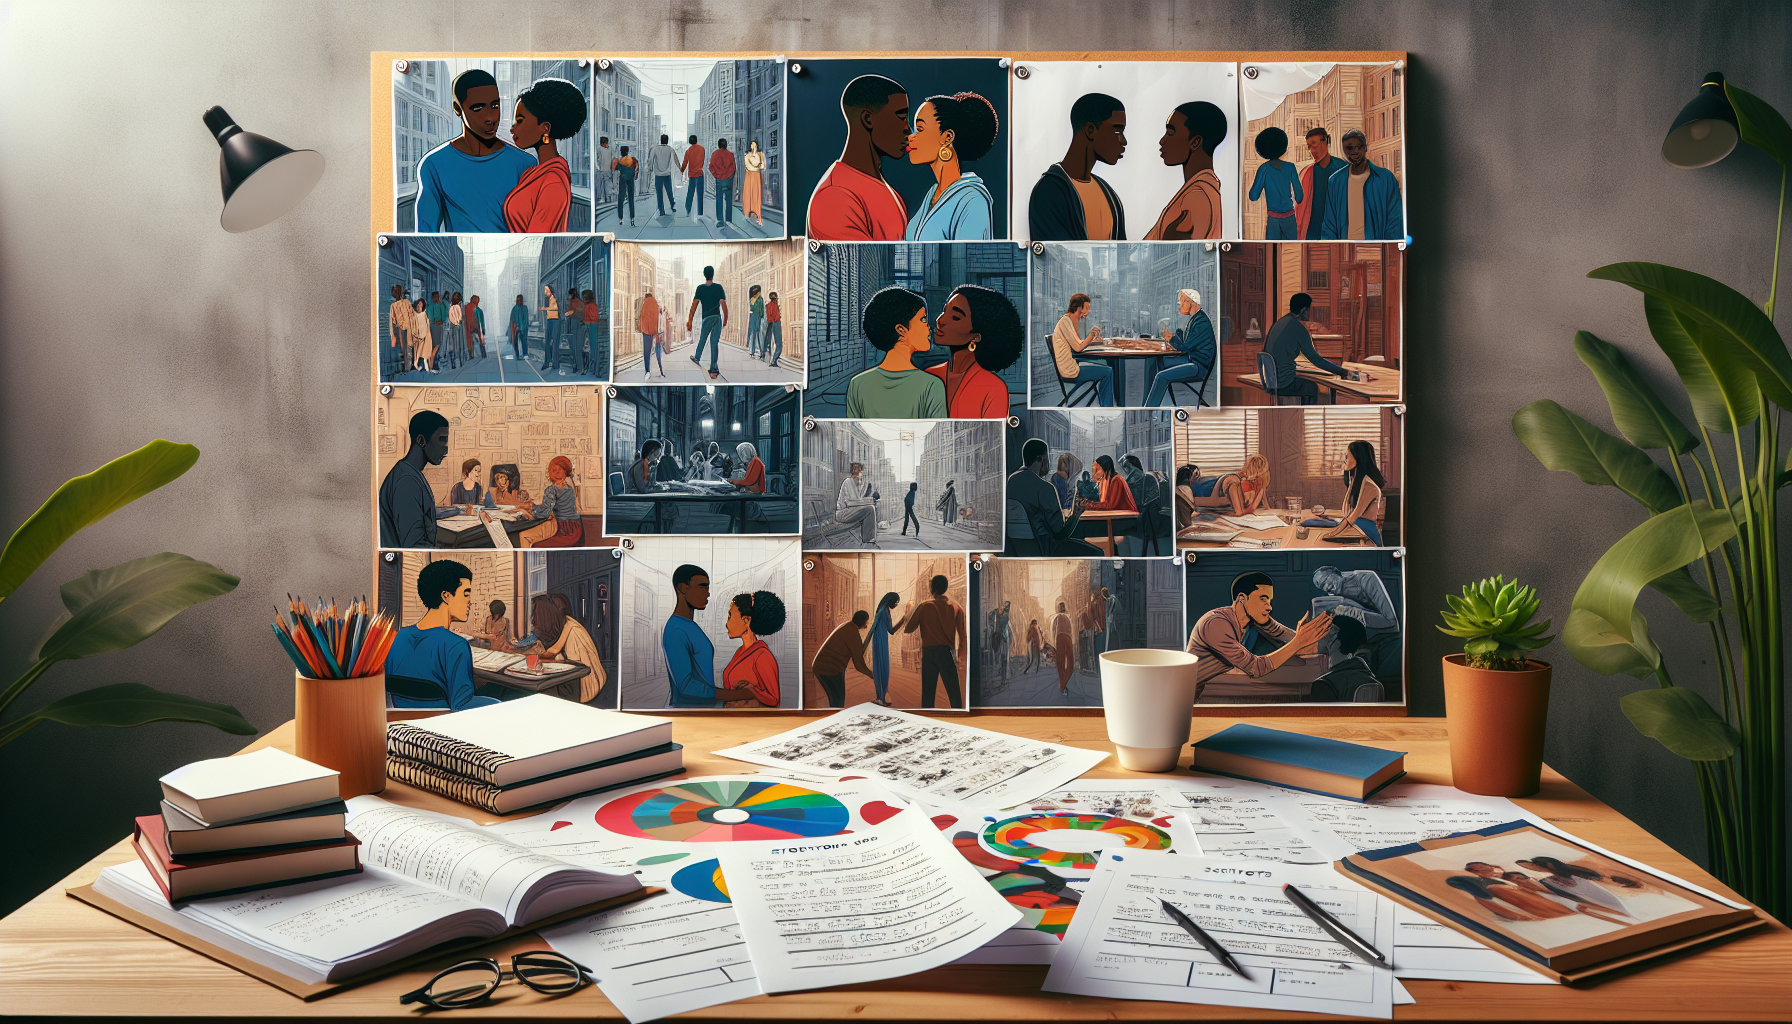 An artist's studio with a storyboard full of scenes from various ensemble romance films, showcasing intricate webs of relationships and character development arcs. Include multiracial actors rehearsin